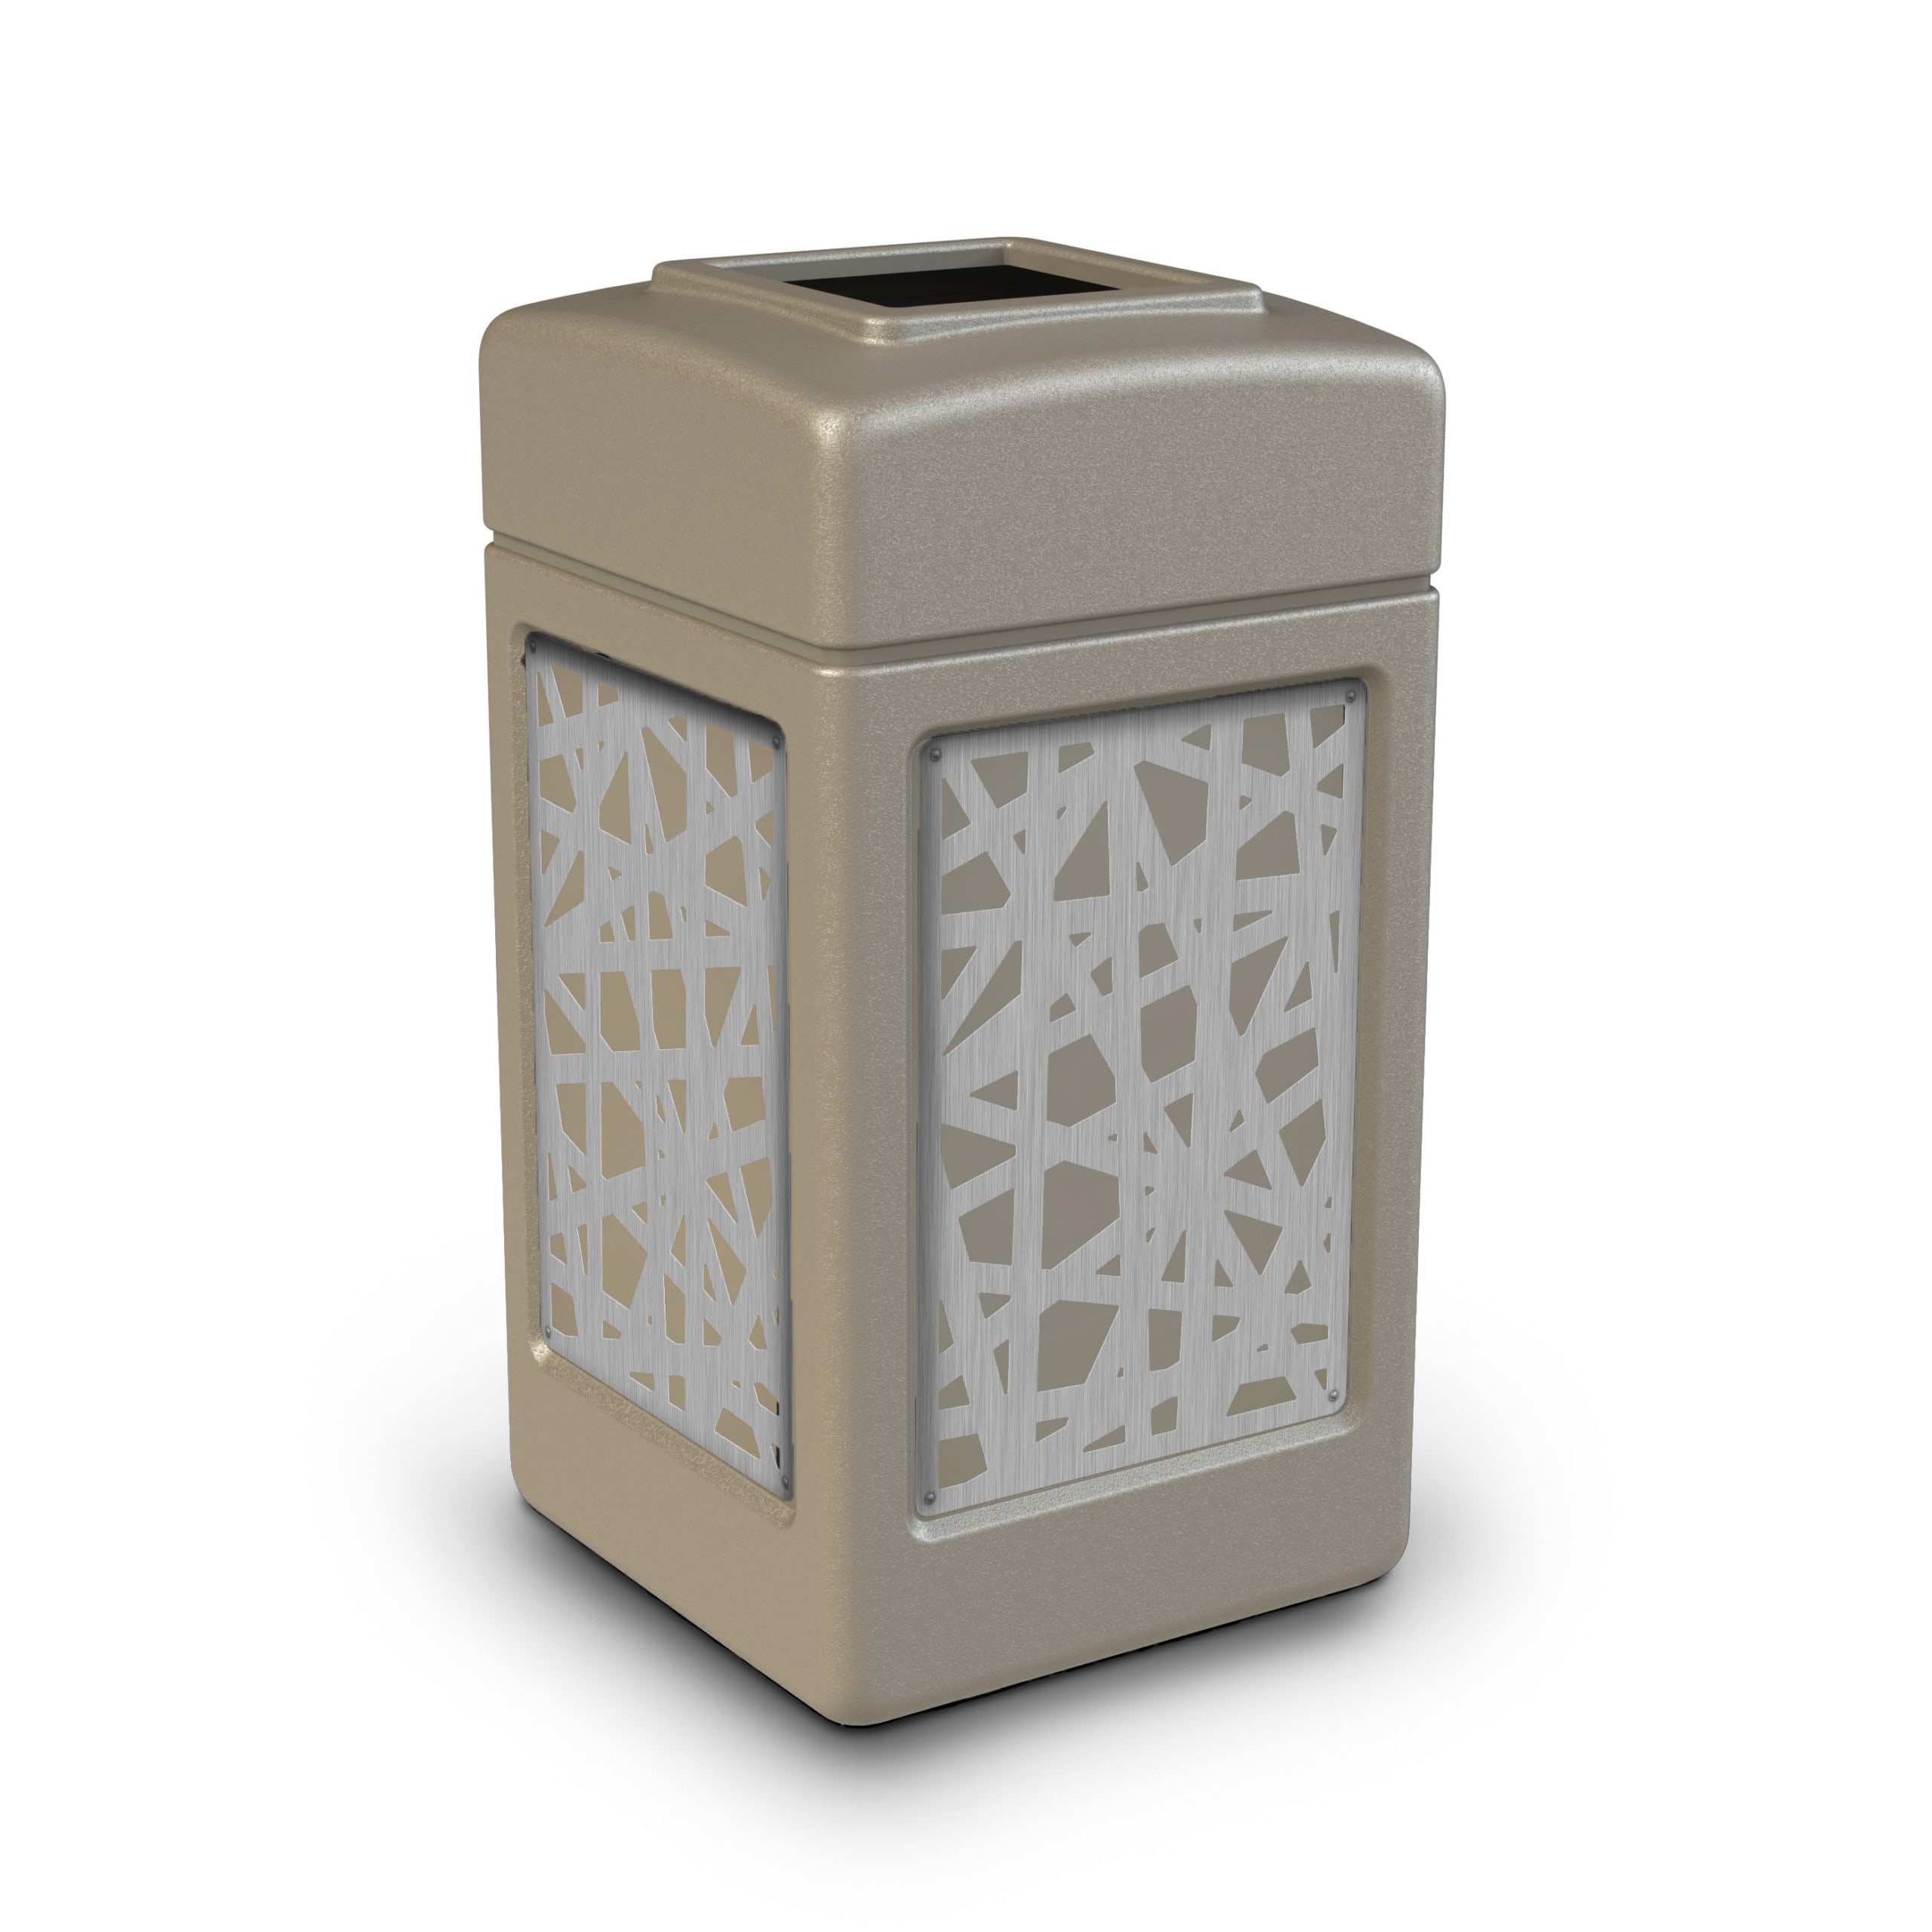 https://www.commercialzone.com/wp-content/uploads/2022/09/734263K-PolyTec-Series-42-Gallon-Square-Waste-Receptacle-Beige-Intermingle-scaled-1.jpg